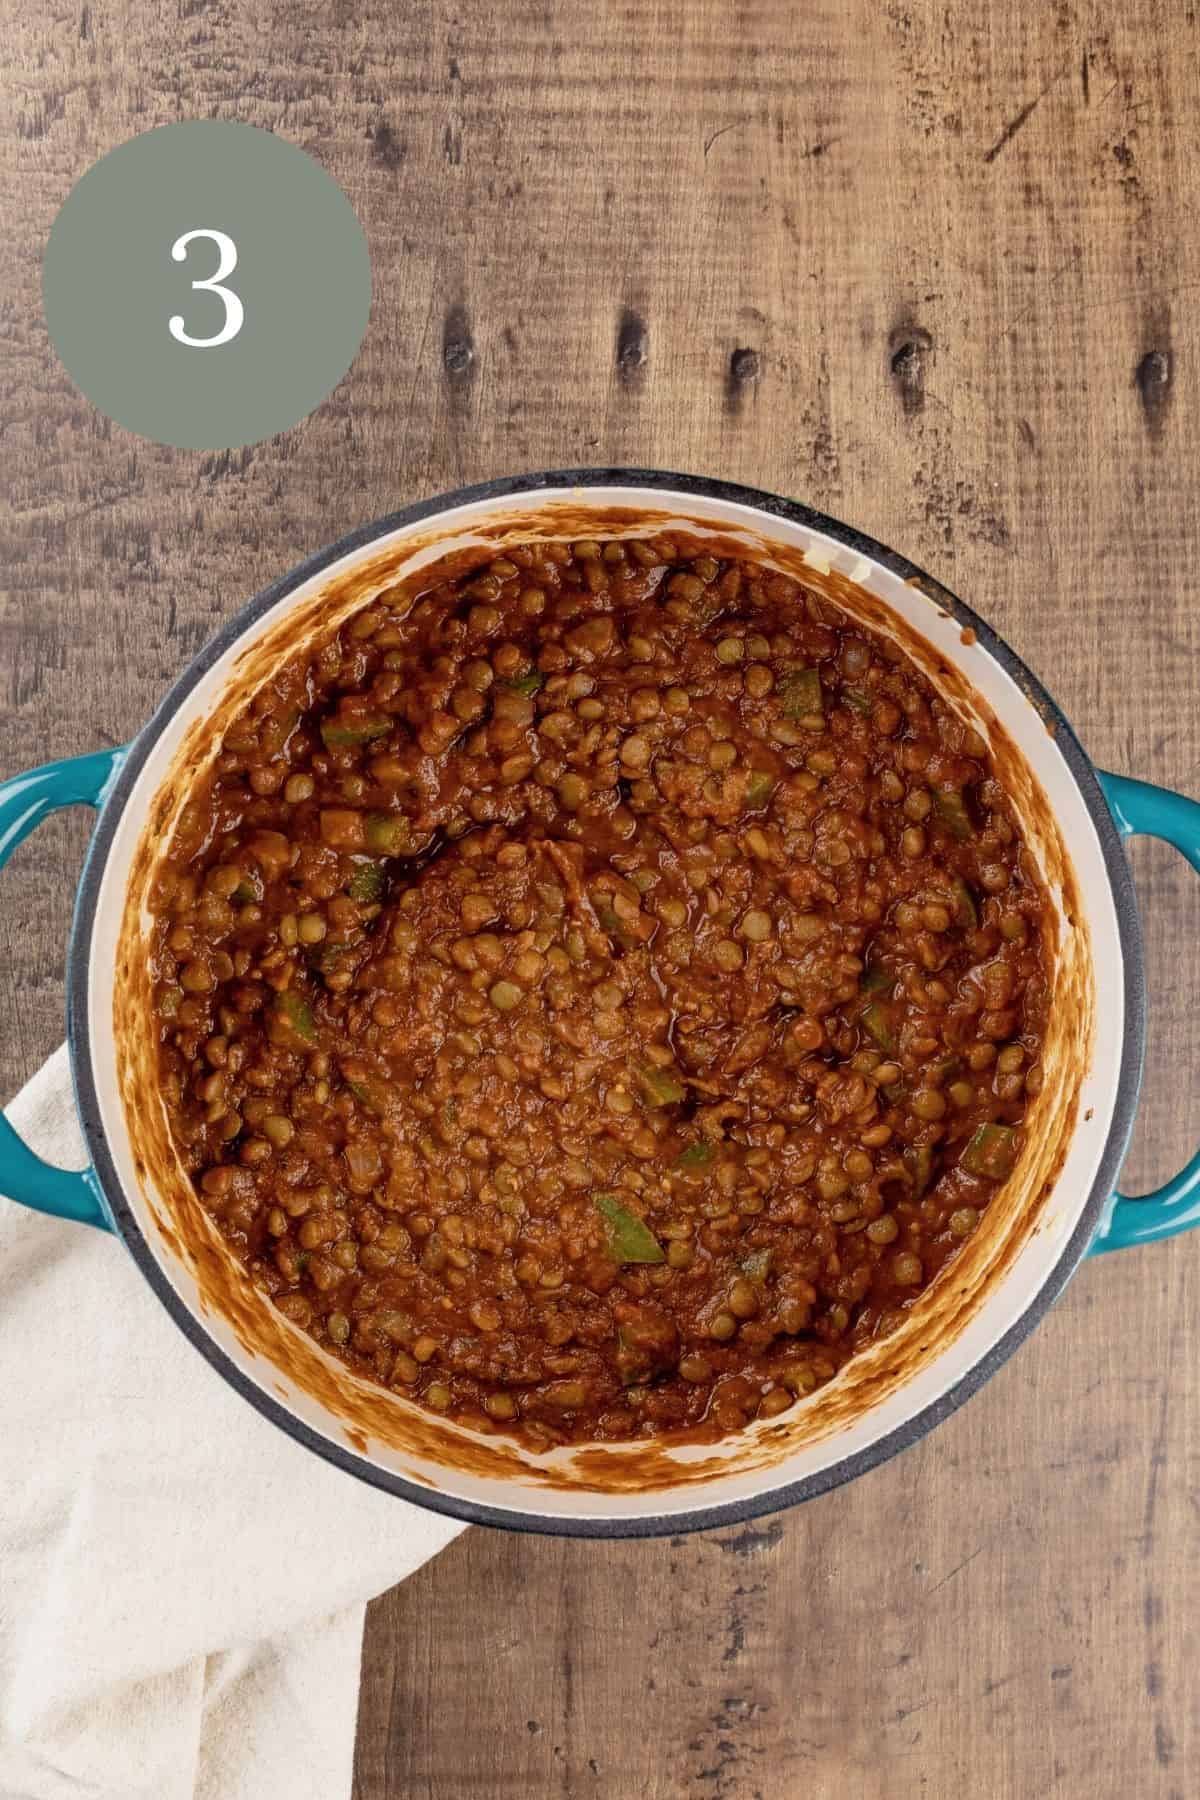 the finished lentils in a blue cooking pot. a white towel is under the pot. a green circle with the number 3 is in the top left corner.